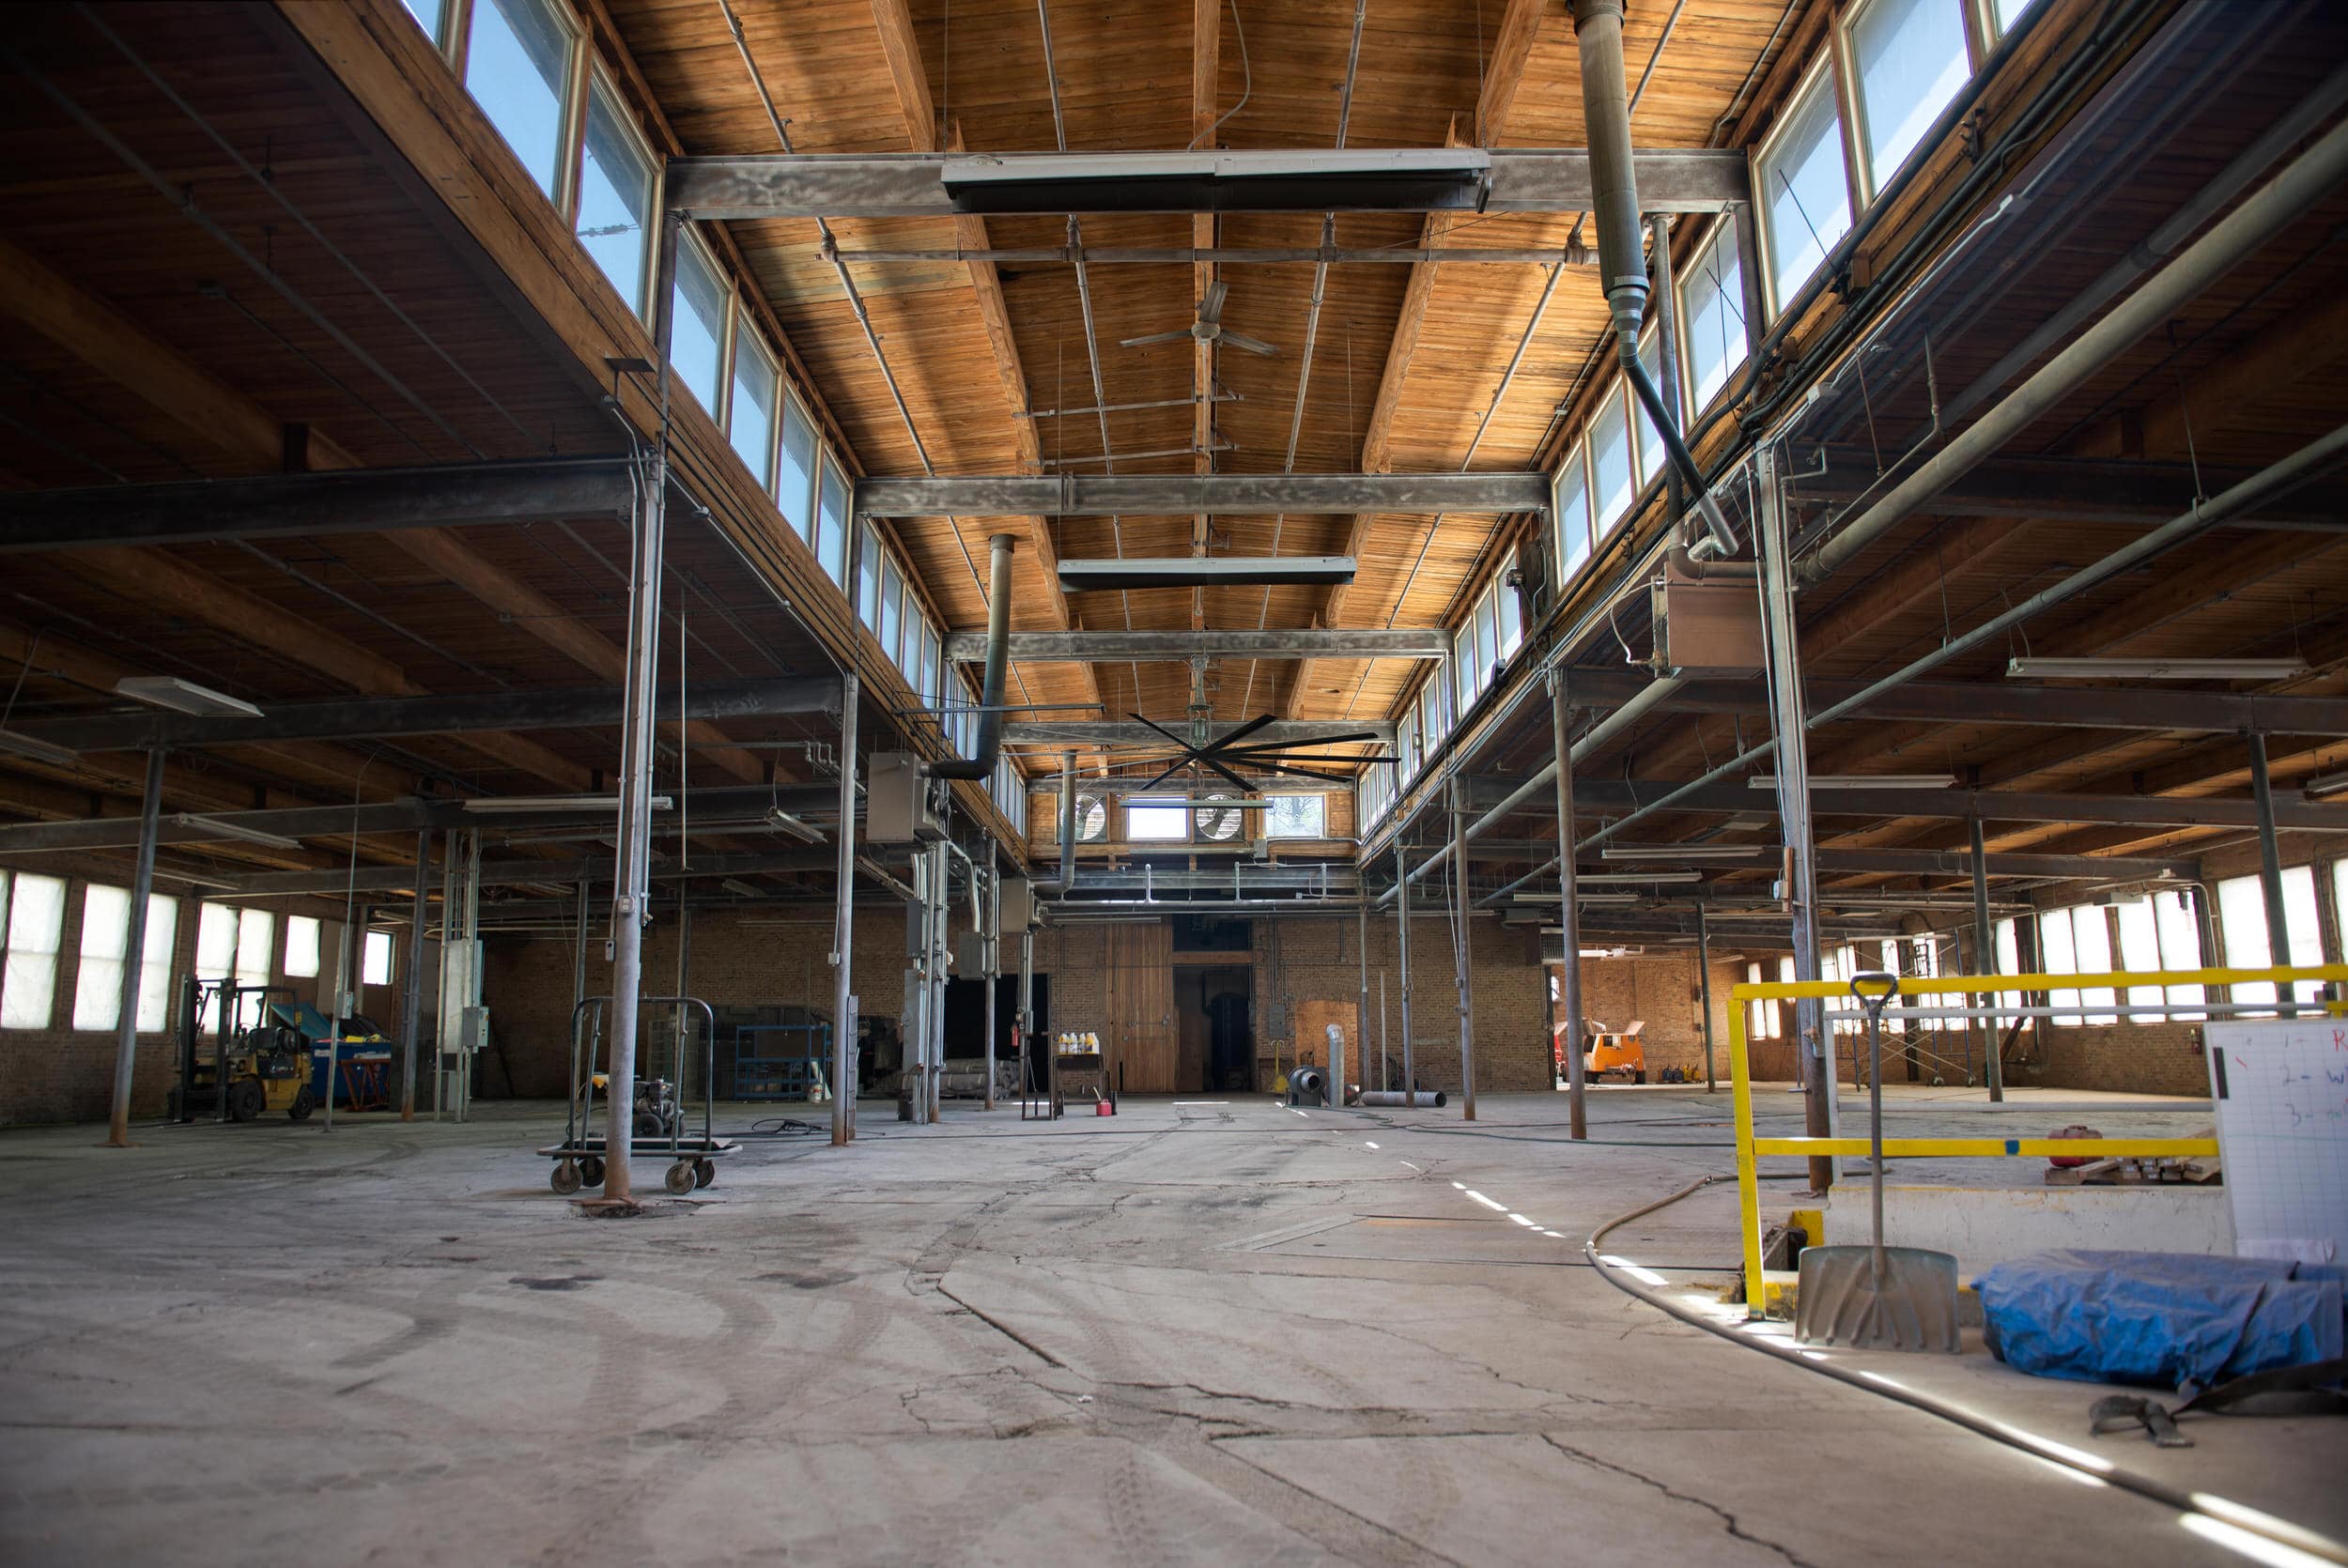 Interior of recently rehabbed industrial, brick and timber, warehouse, former factory with natural lighting